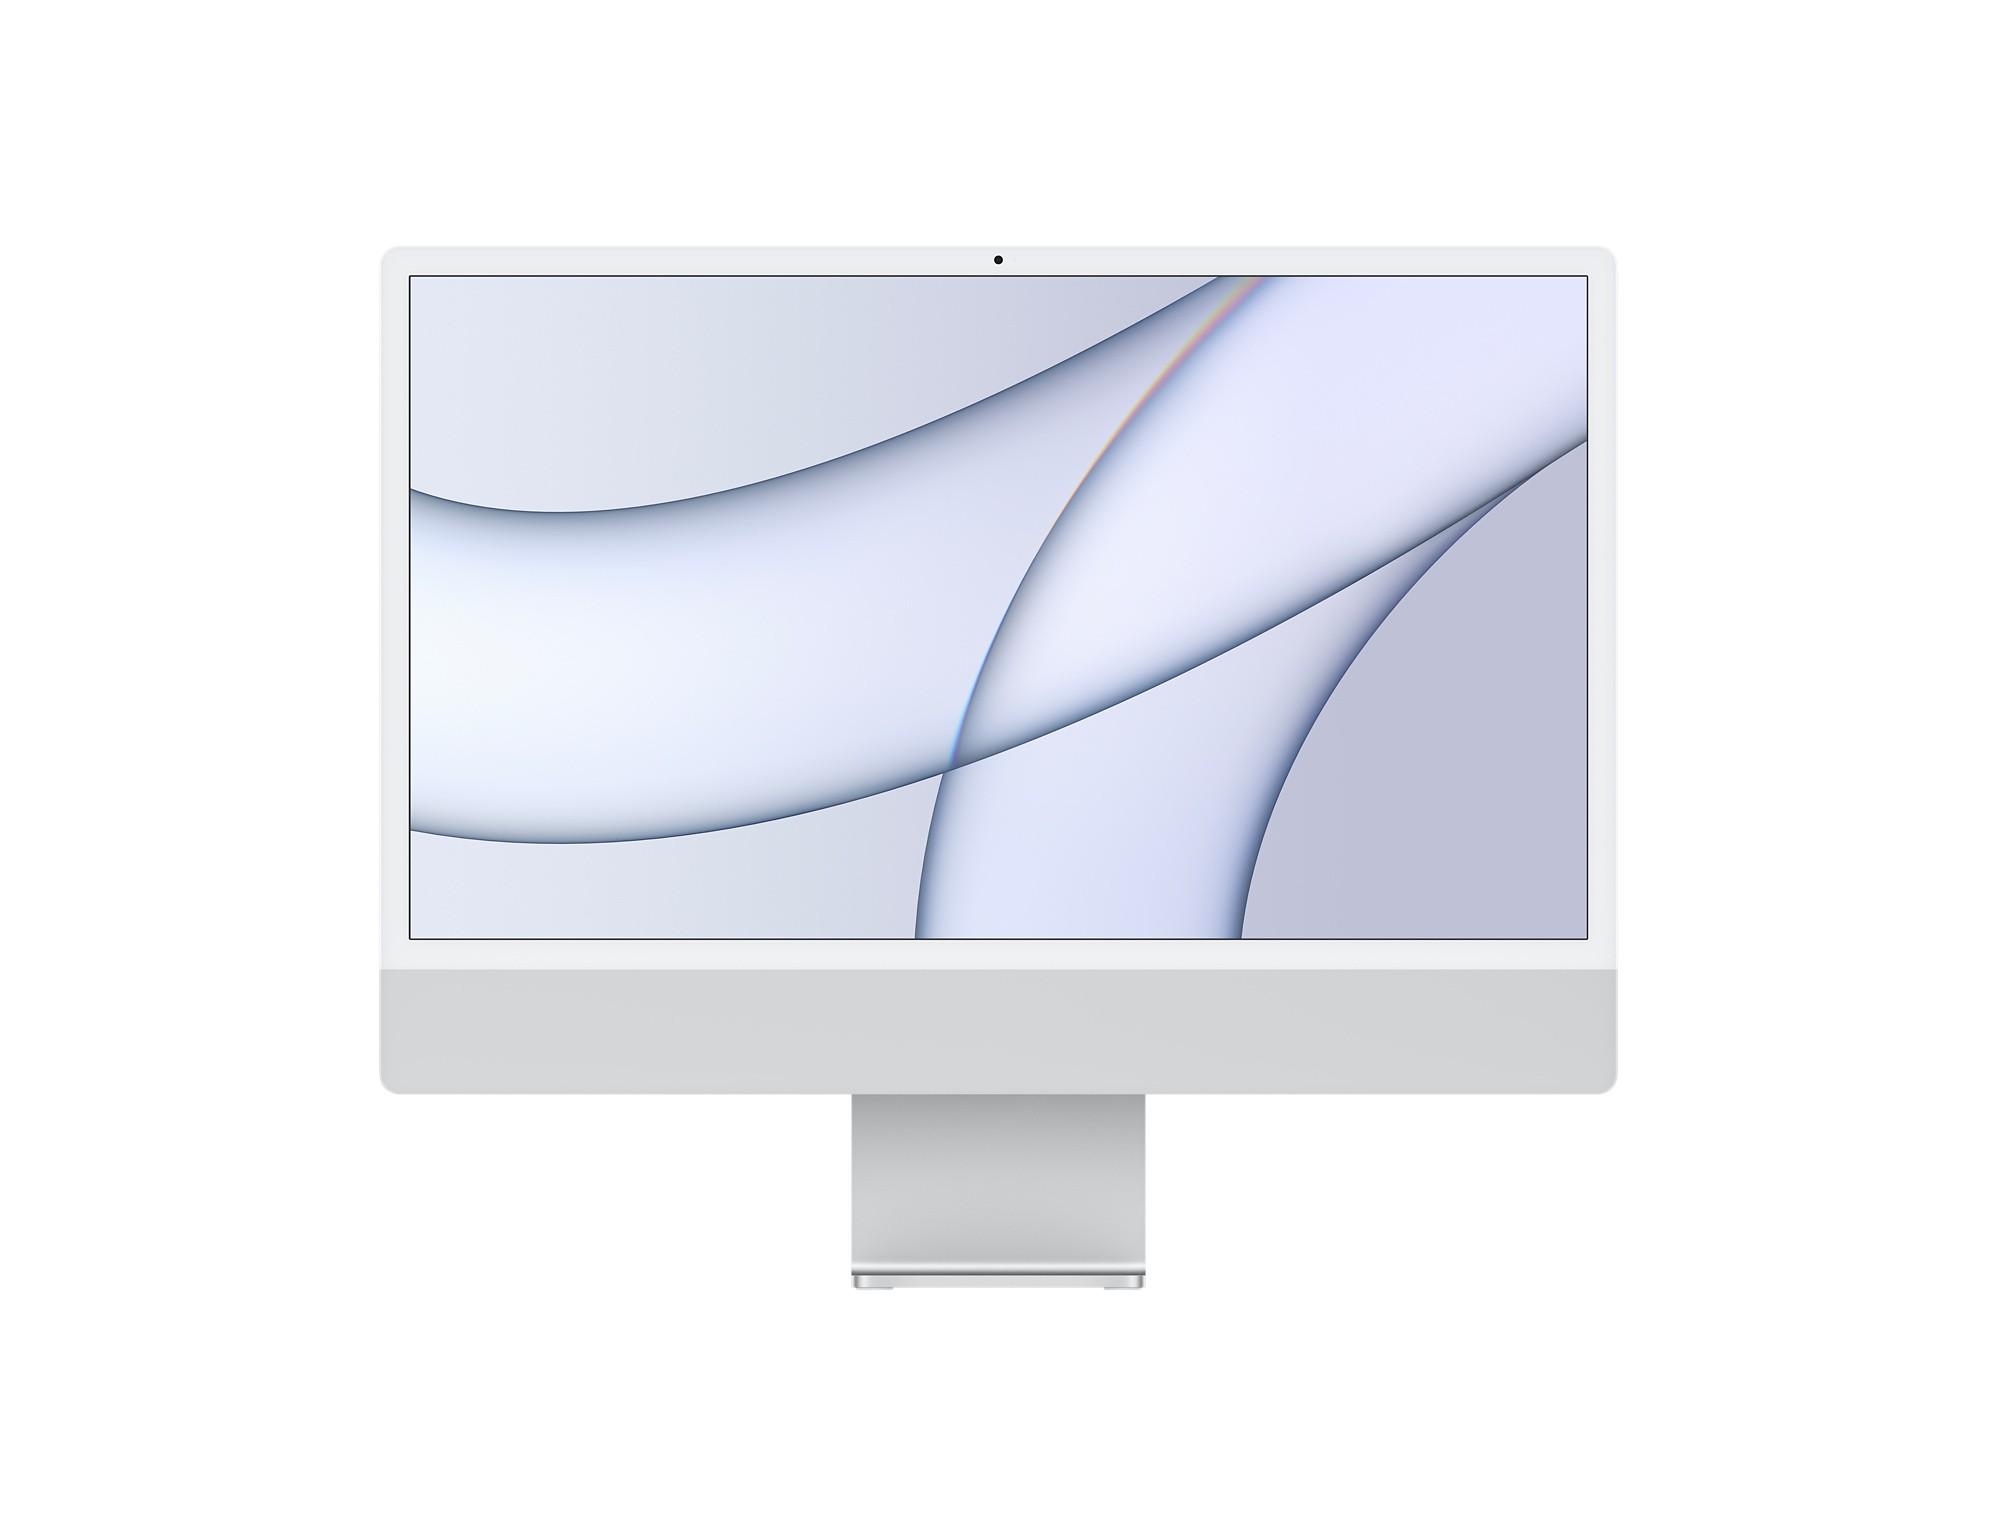 MGPC3 Apple iMac 24 inch 4.5K display with M1 chip and 8-core CPU